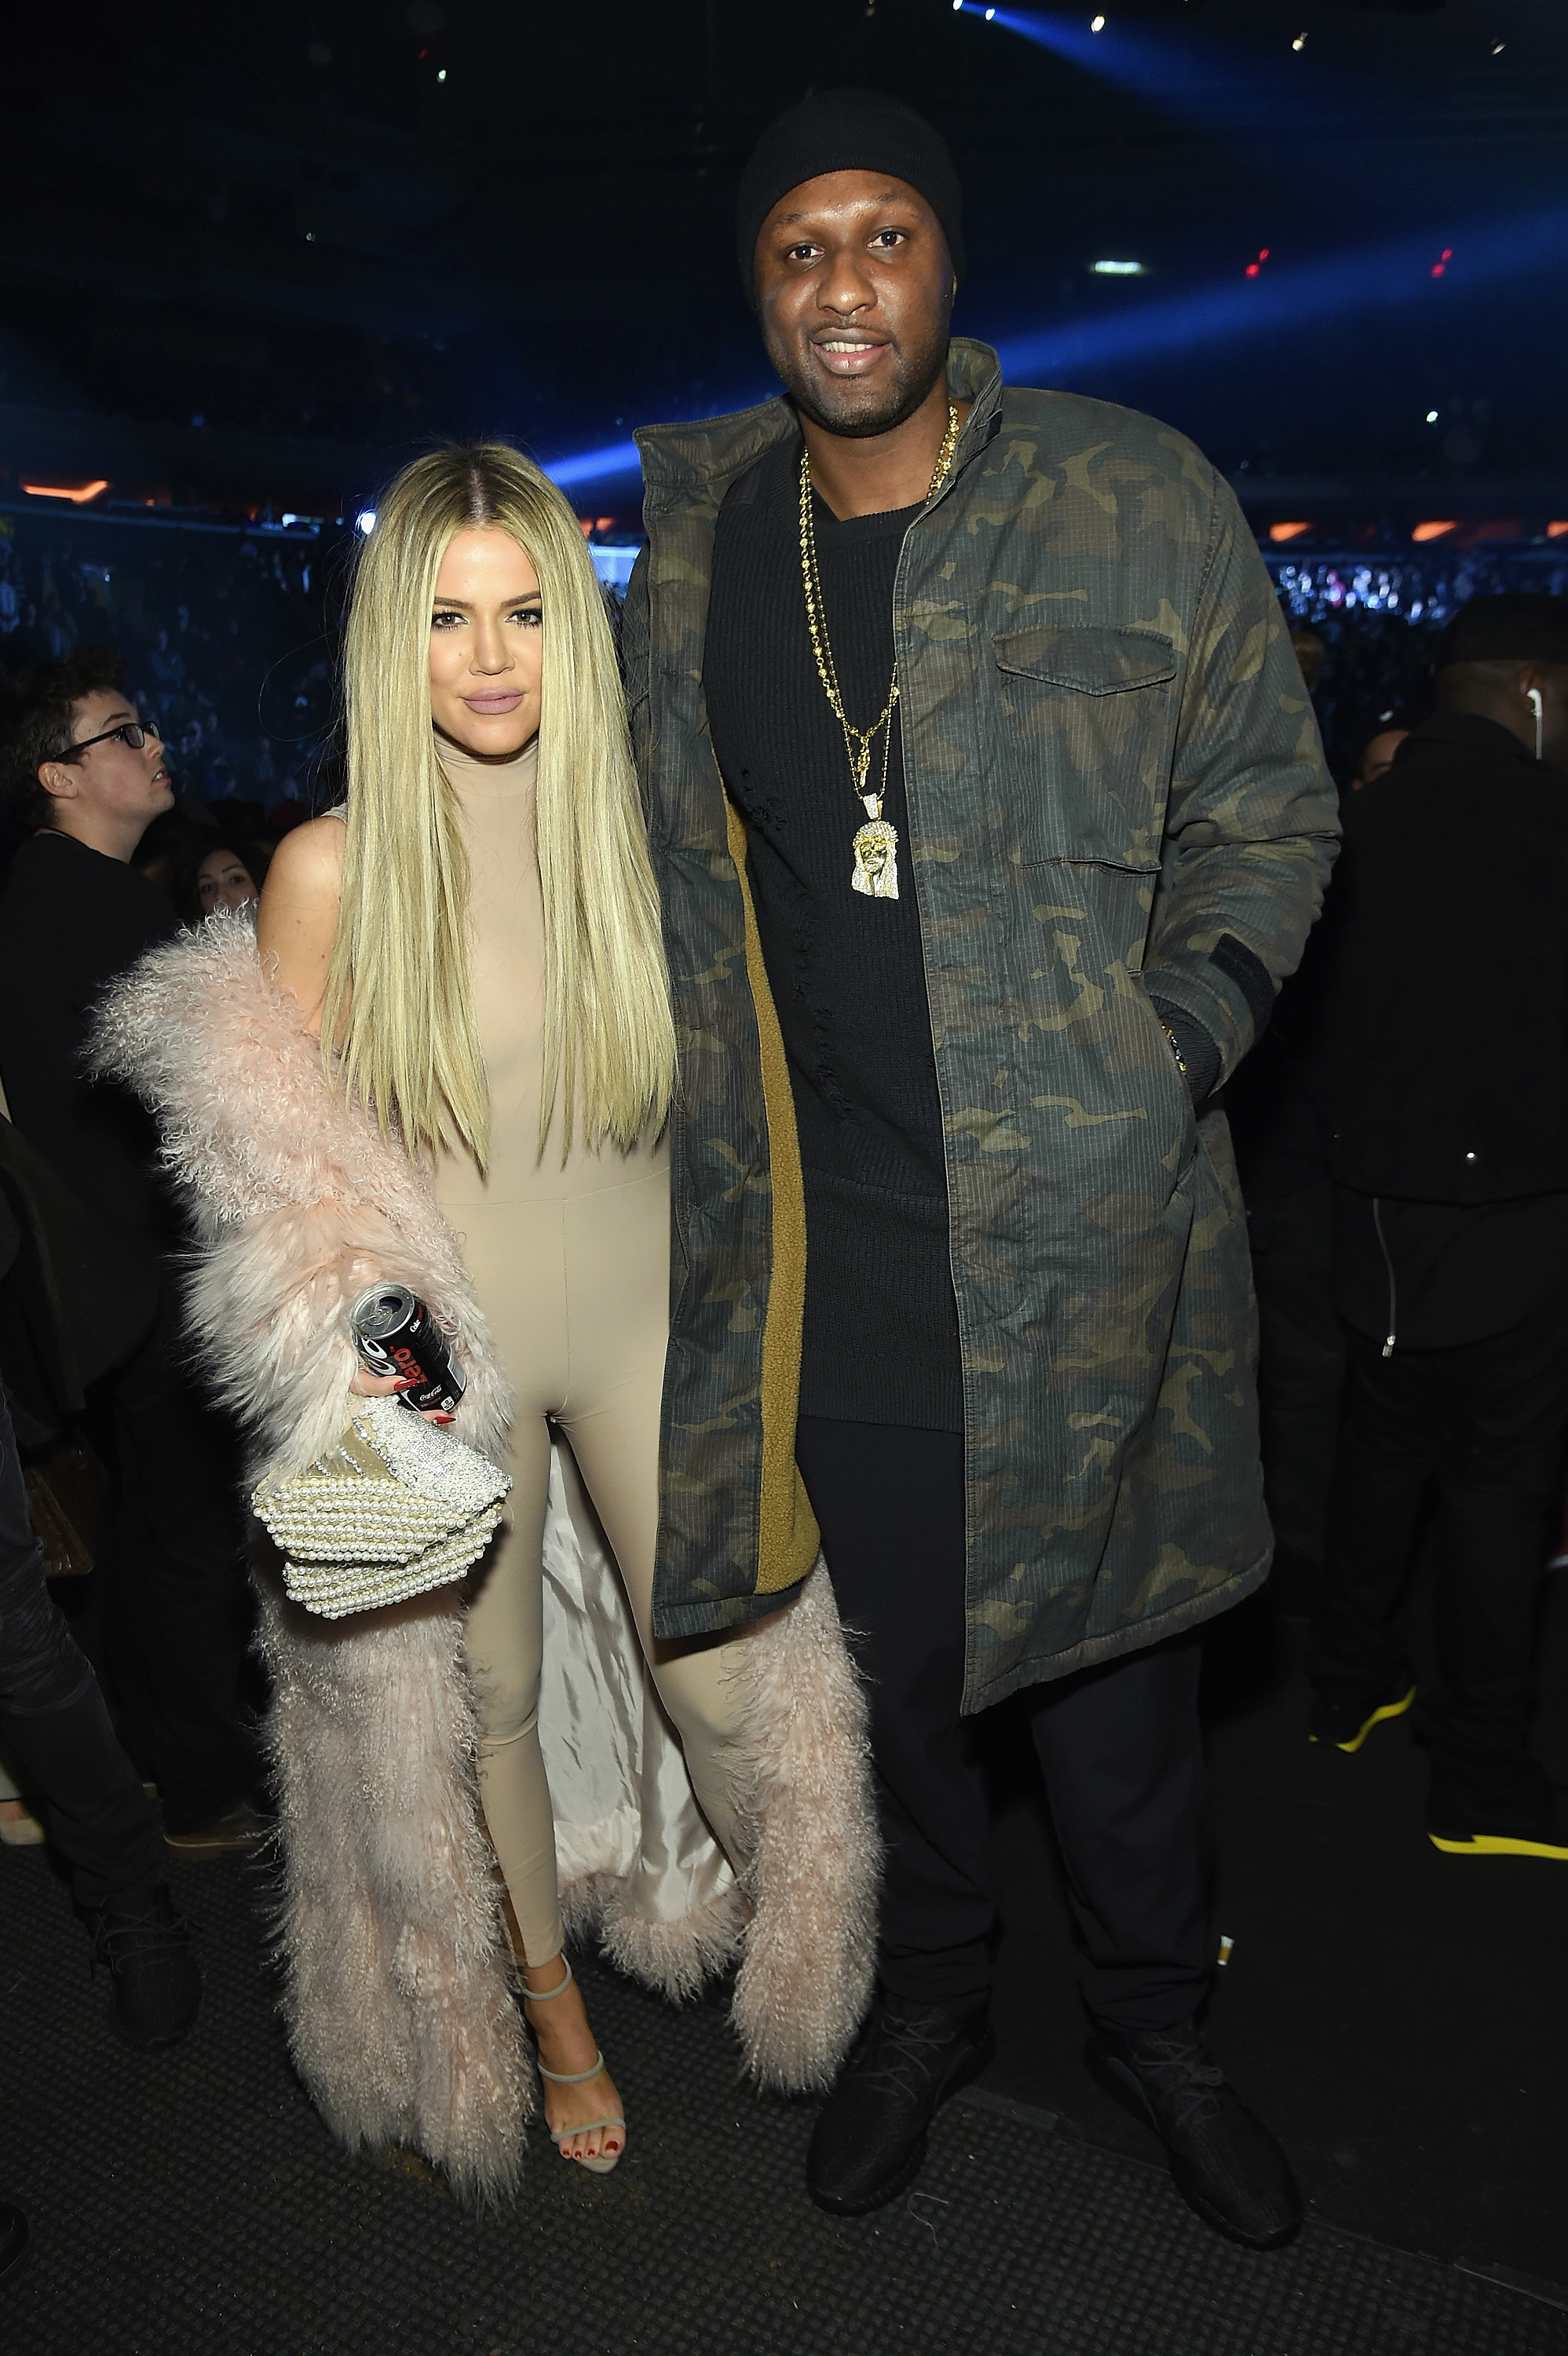 lamar and khloe at an event